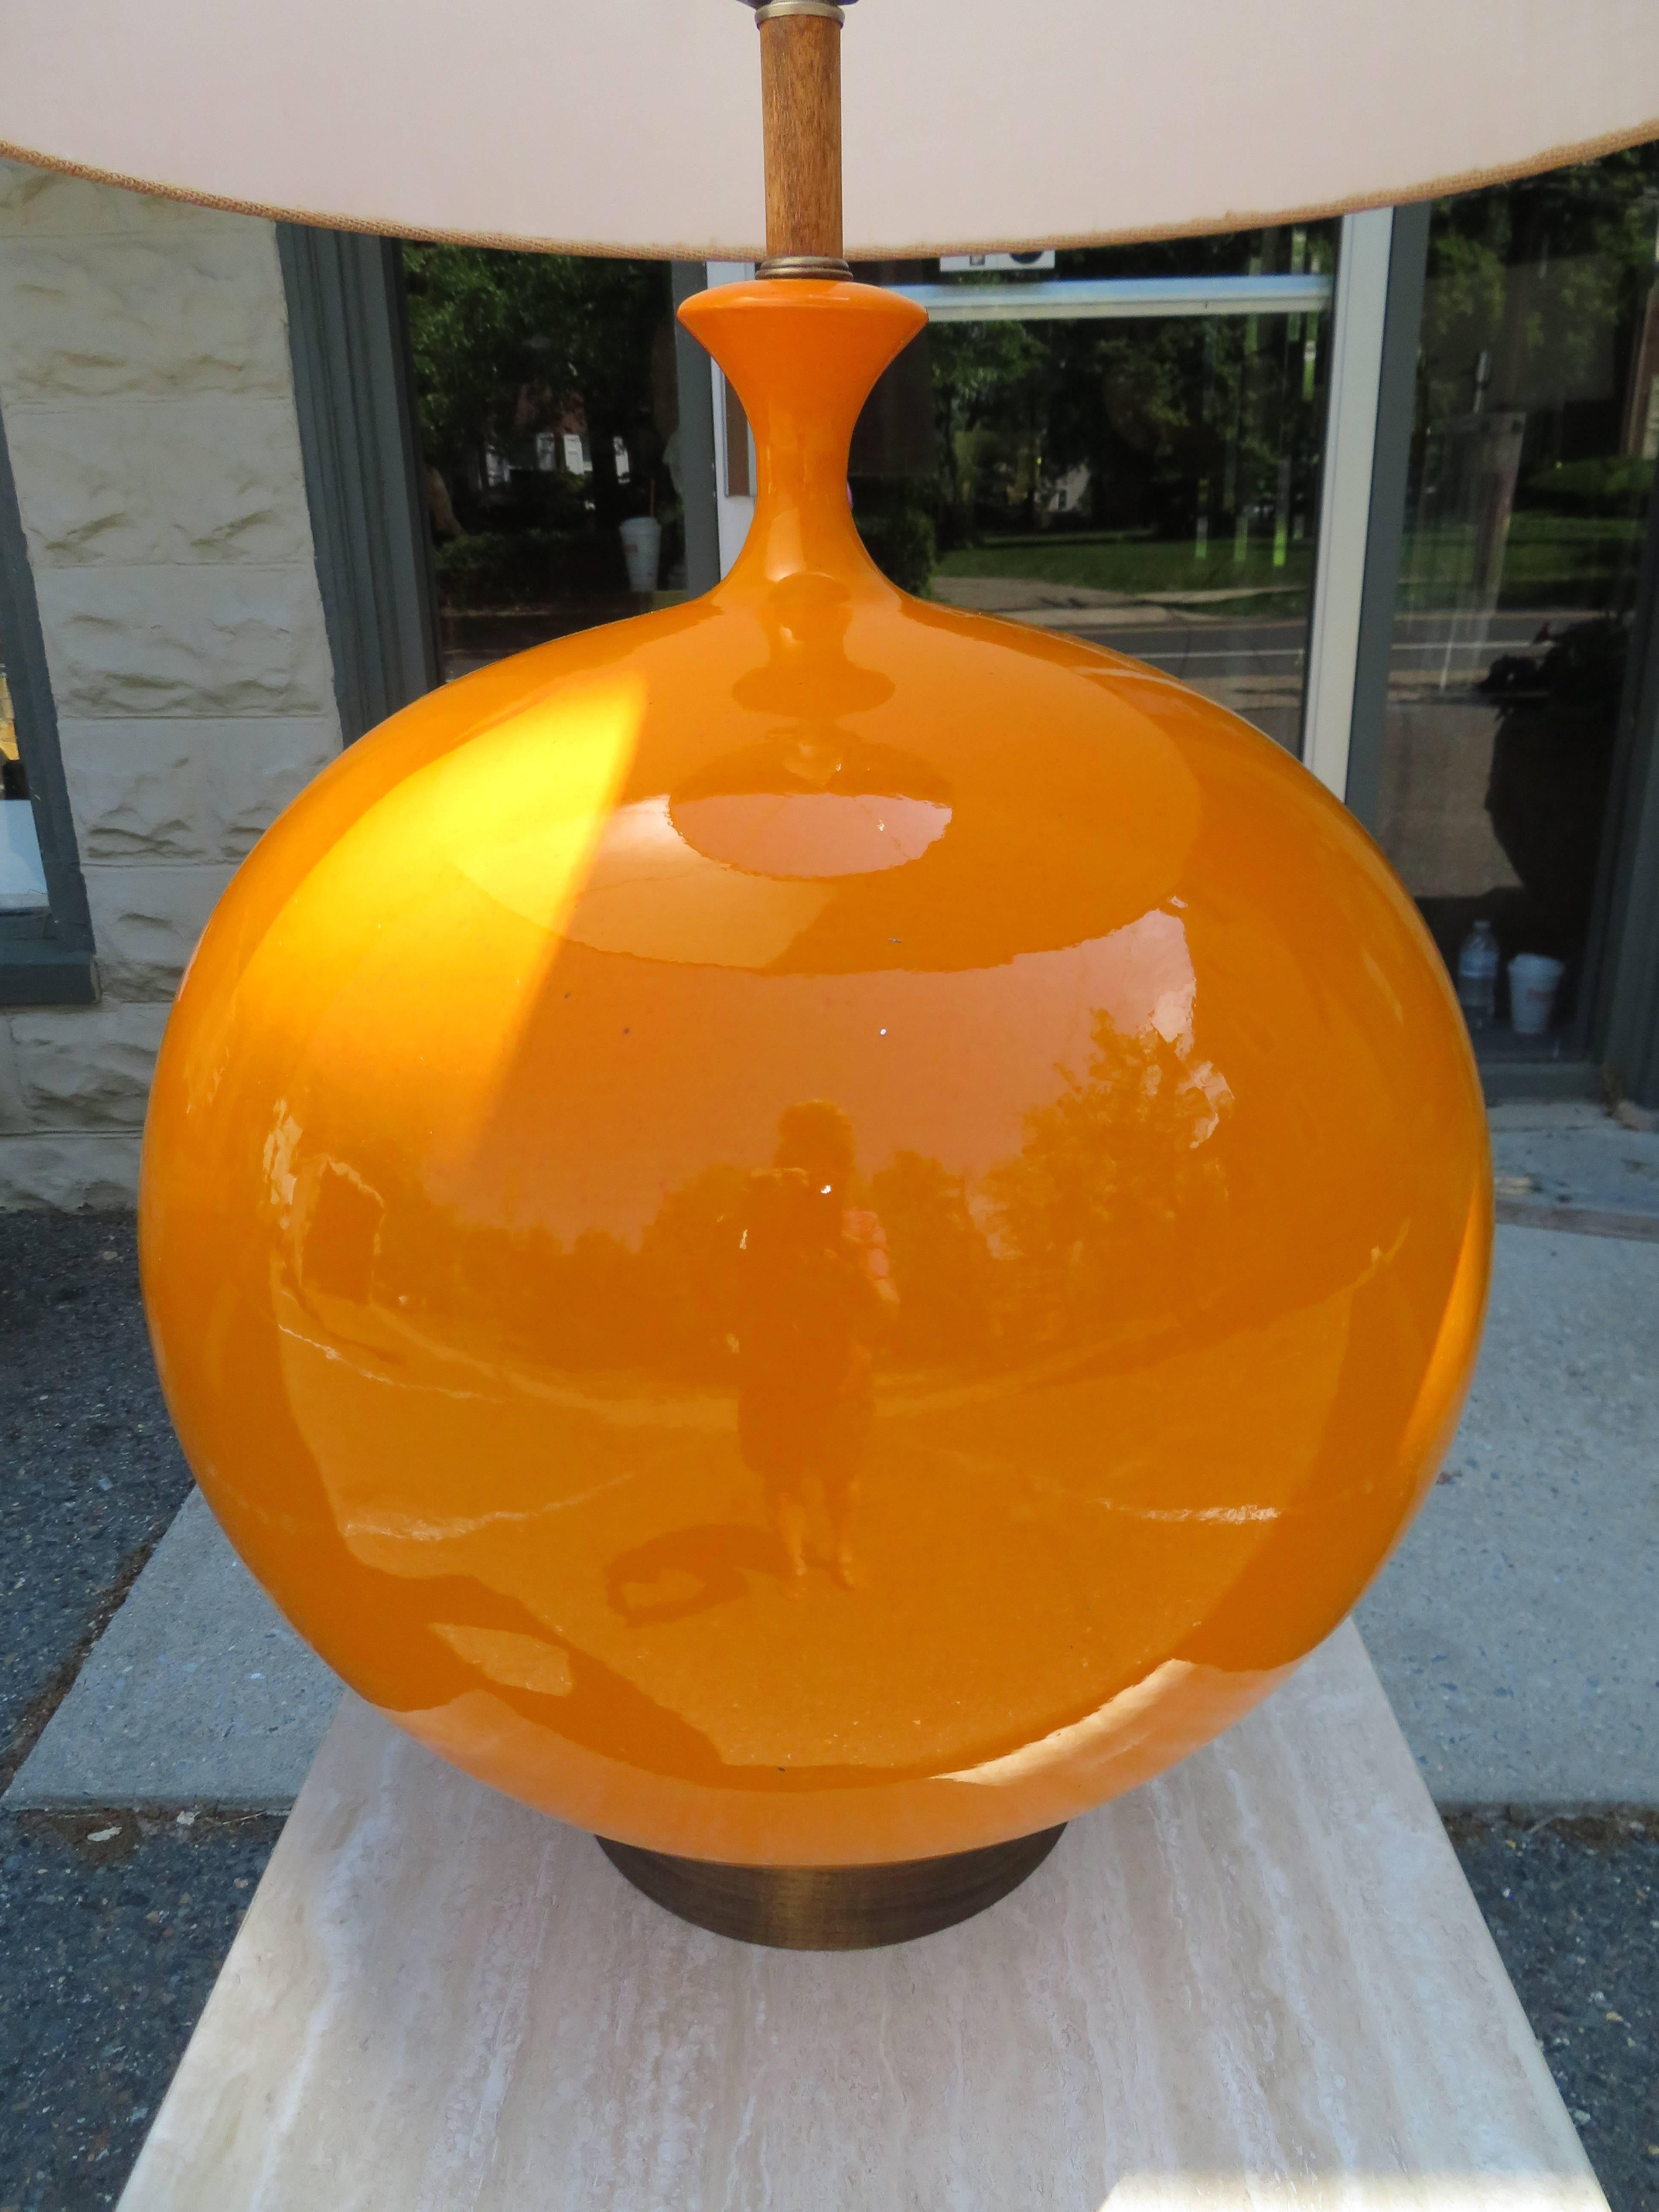 Absolutely massive orange glazed ceramic orb lamp. This spectacular lamp stands over 50